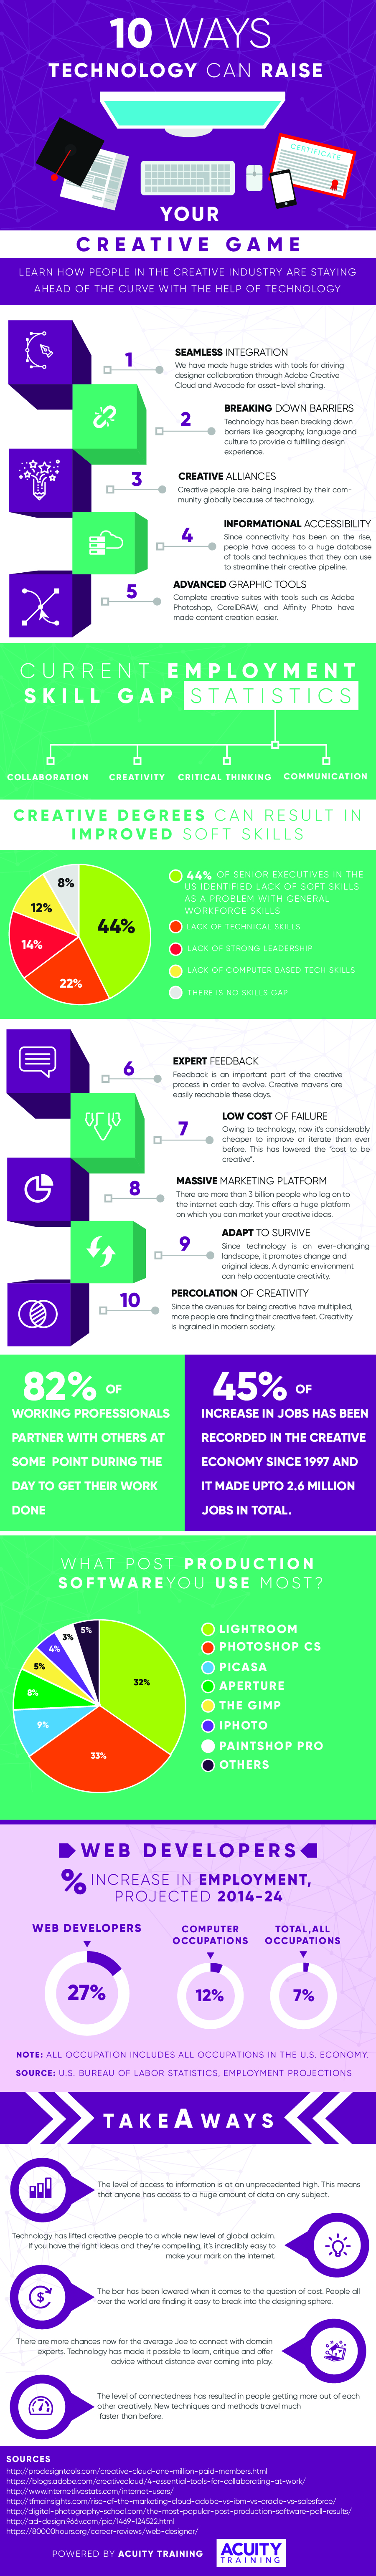 Infographic showing the 10 ways technology can improve your creativity